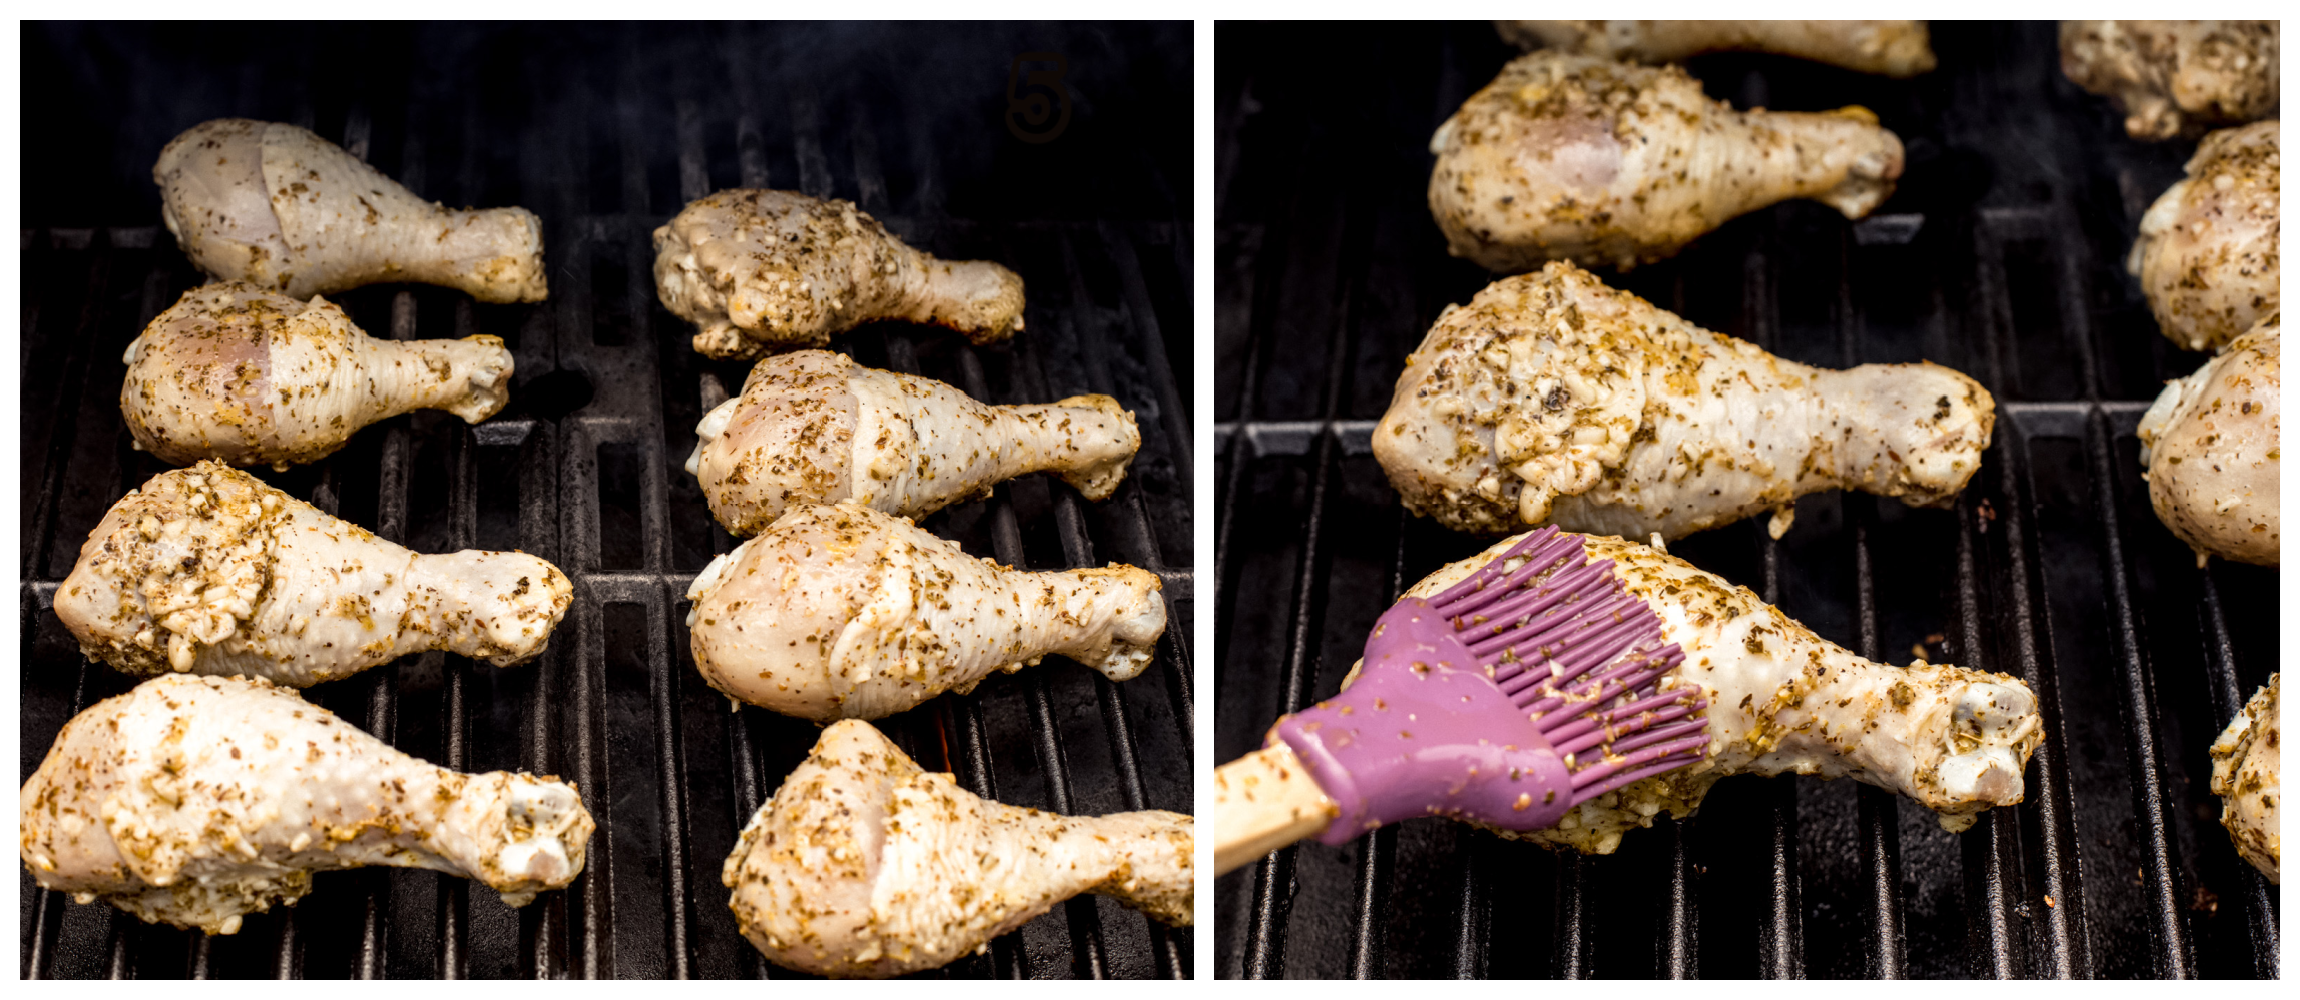 two photos showing chicken legs on a grill in one, and chicken legs being brushed with marinade in second.